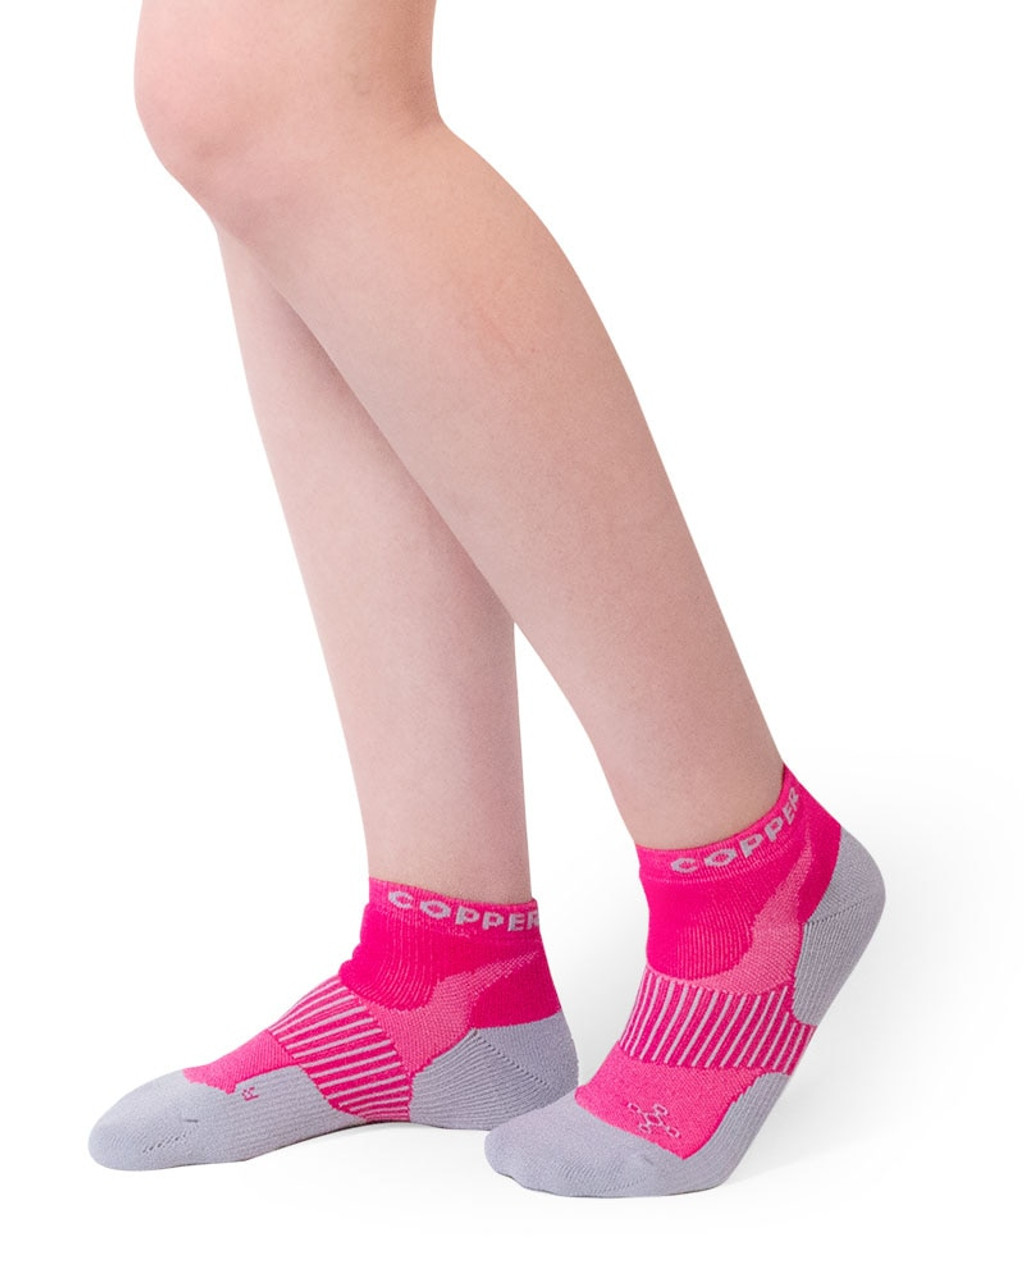 Women's Performance Compression Ankle Socks Outlet